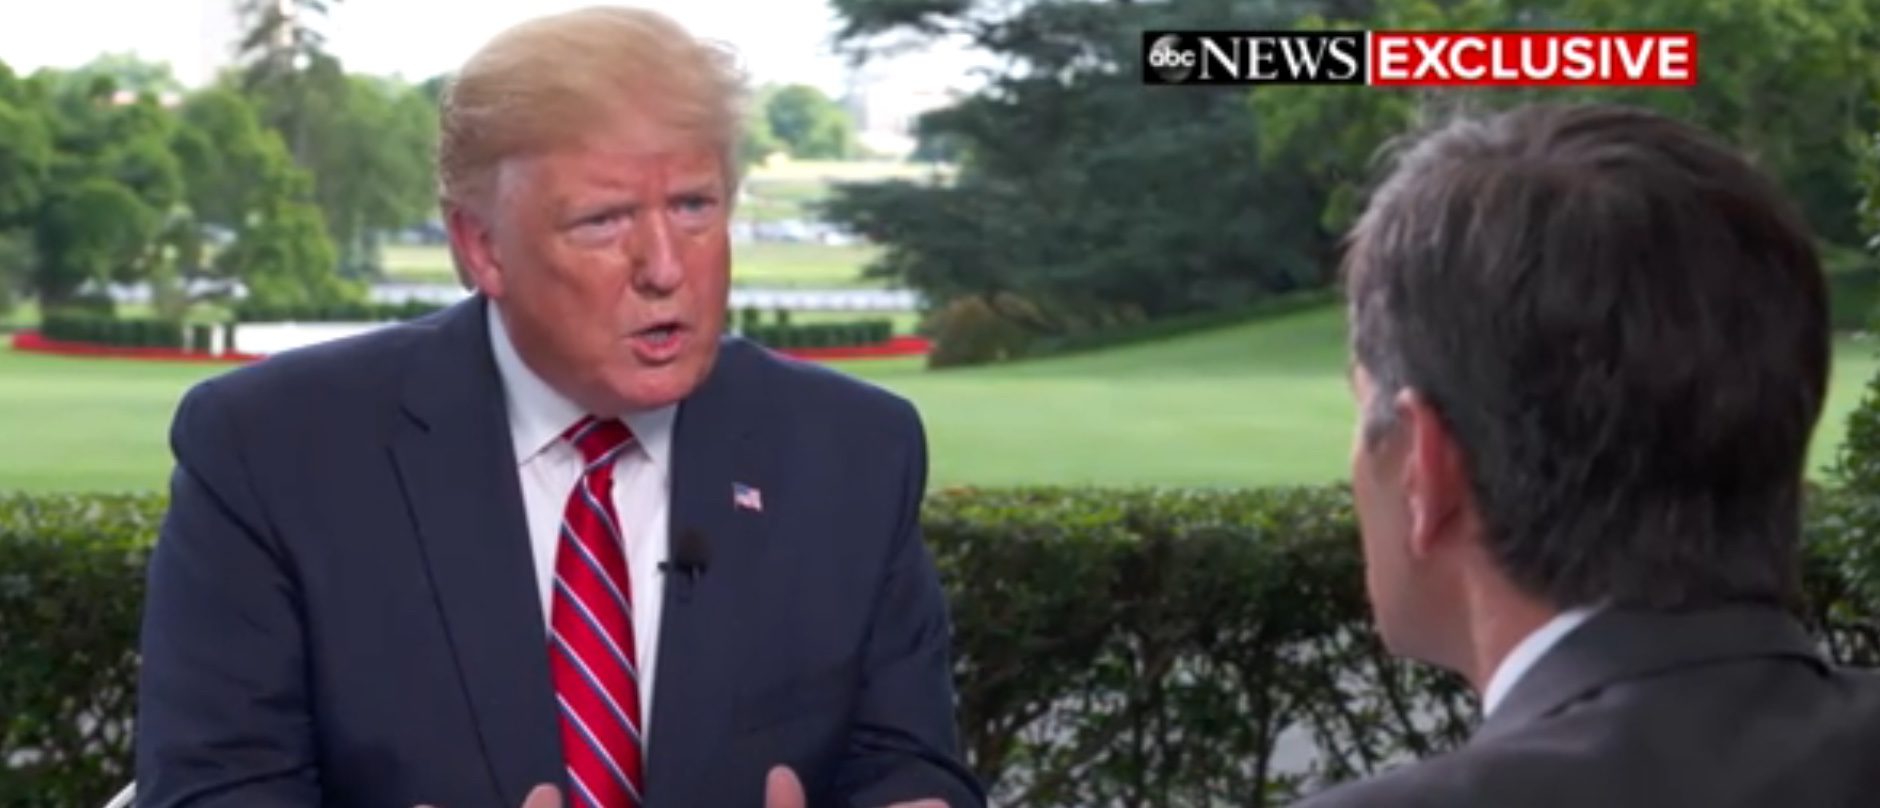 President Donald Trump is interviewed by ABC’s George Stephanopoulos, June 14, 2019. ABC News screenshot